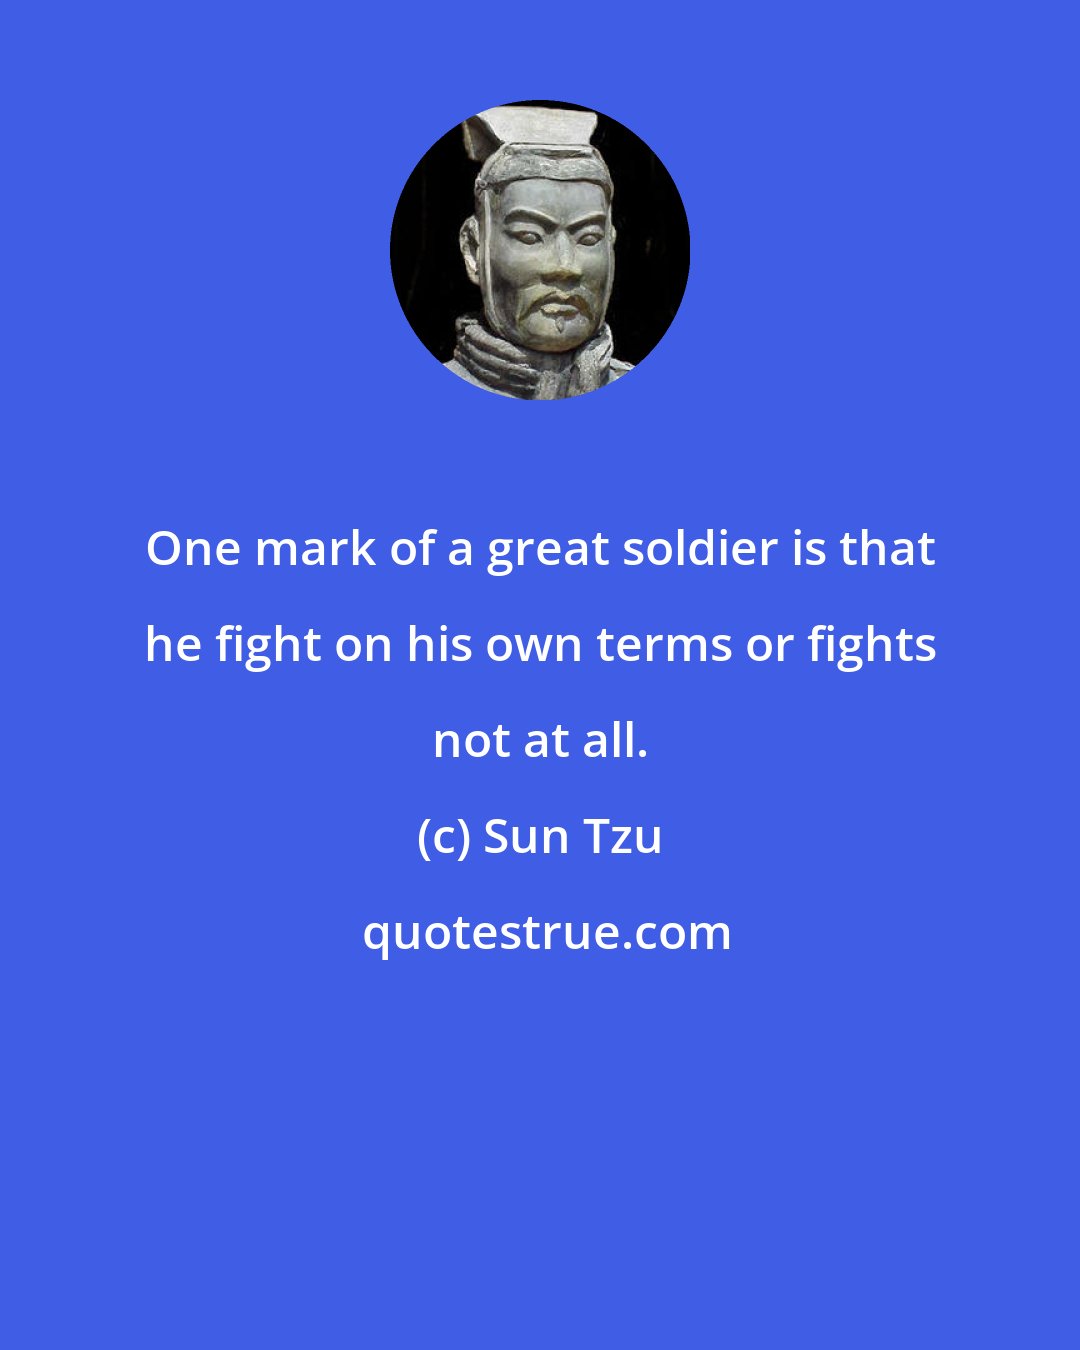 Sun Tzu: One mark of a great soldier is that he fight on his own terms or fights not at all.